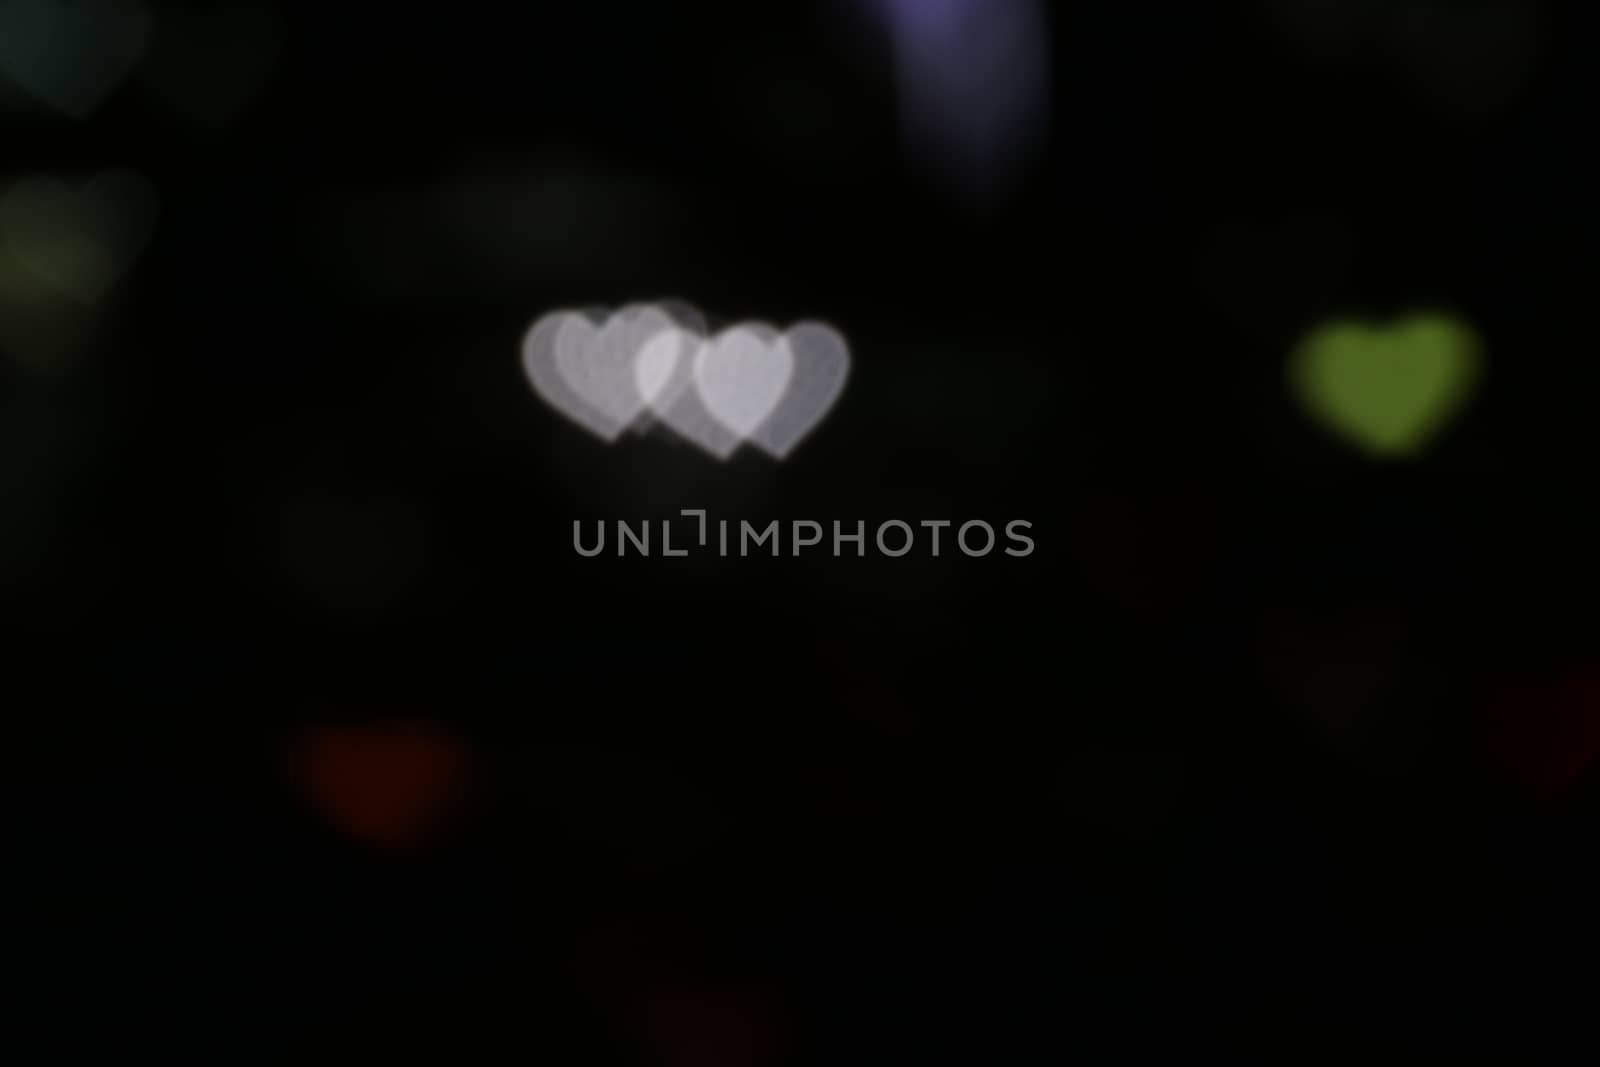 Valentines Colorful heart-shaped on black background lighting bokeh for decoration at night backdrop wallpaper blurred valentine, Love Pictures background, Lighting heart shaped soft at night abstract by cgdeaw